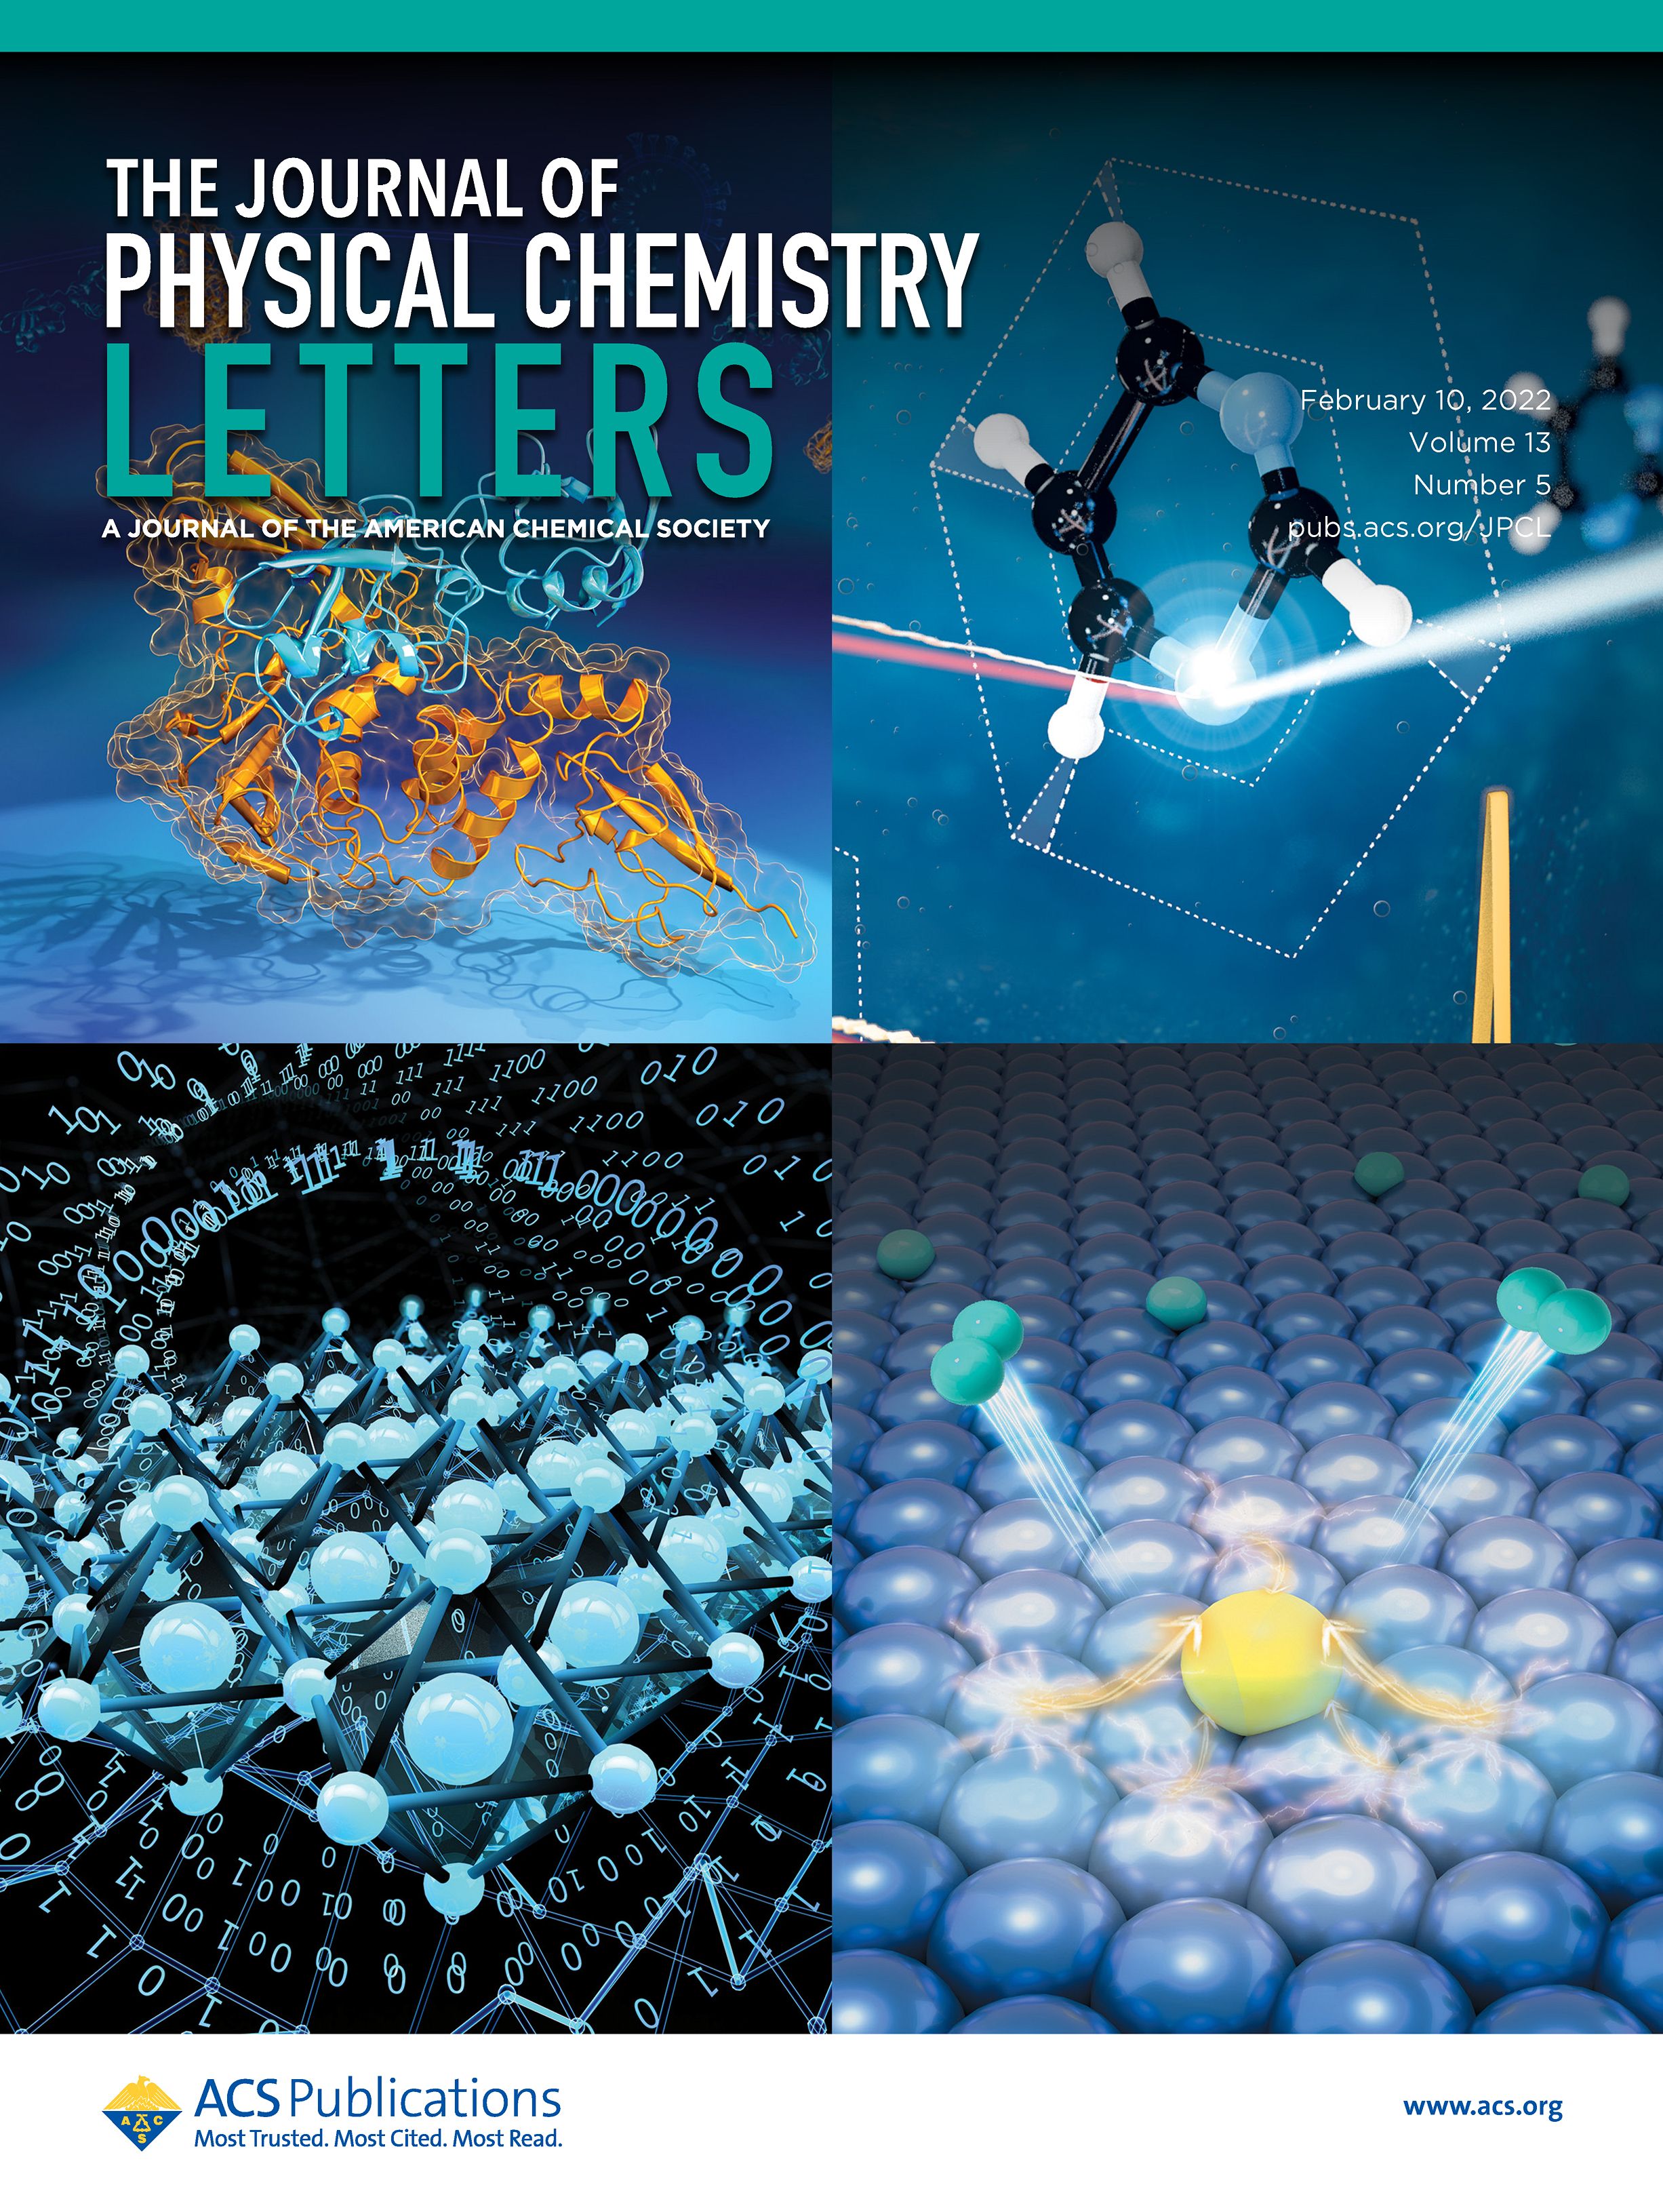 The Journal of Physical Chemistry Letters journal cover